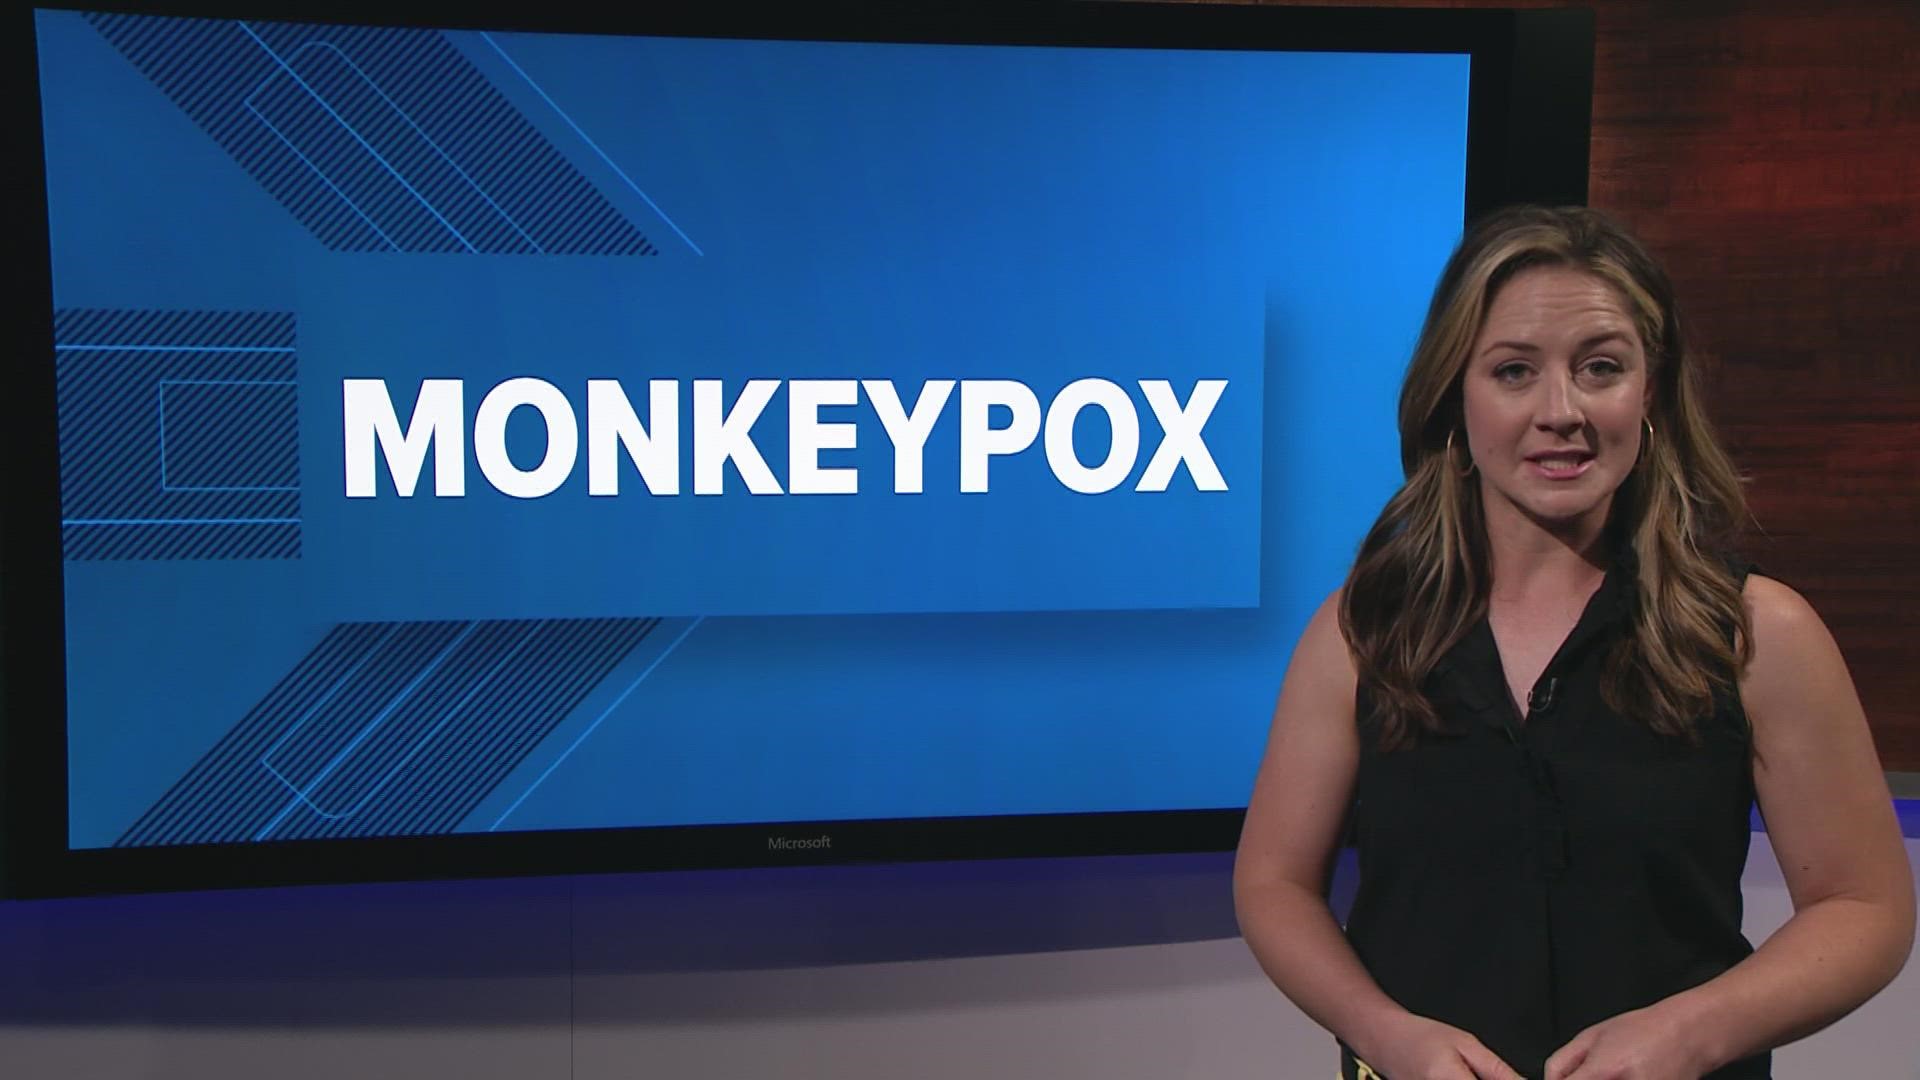 Colorado's public health leaders are reporting the state's first suspected case of Monkeypox. Here's 9News reporter Jennifer Meckles.